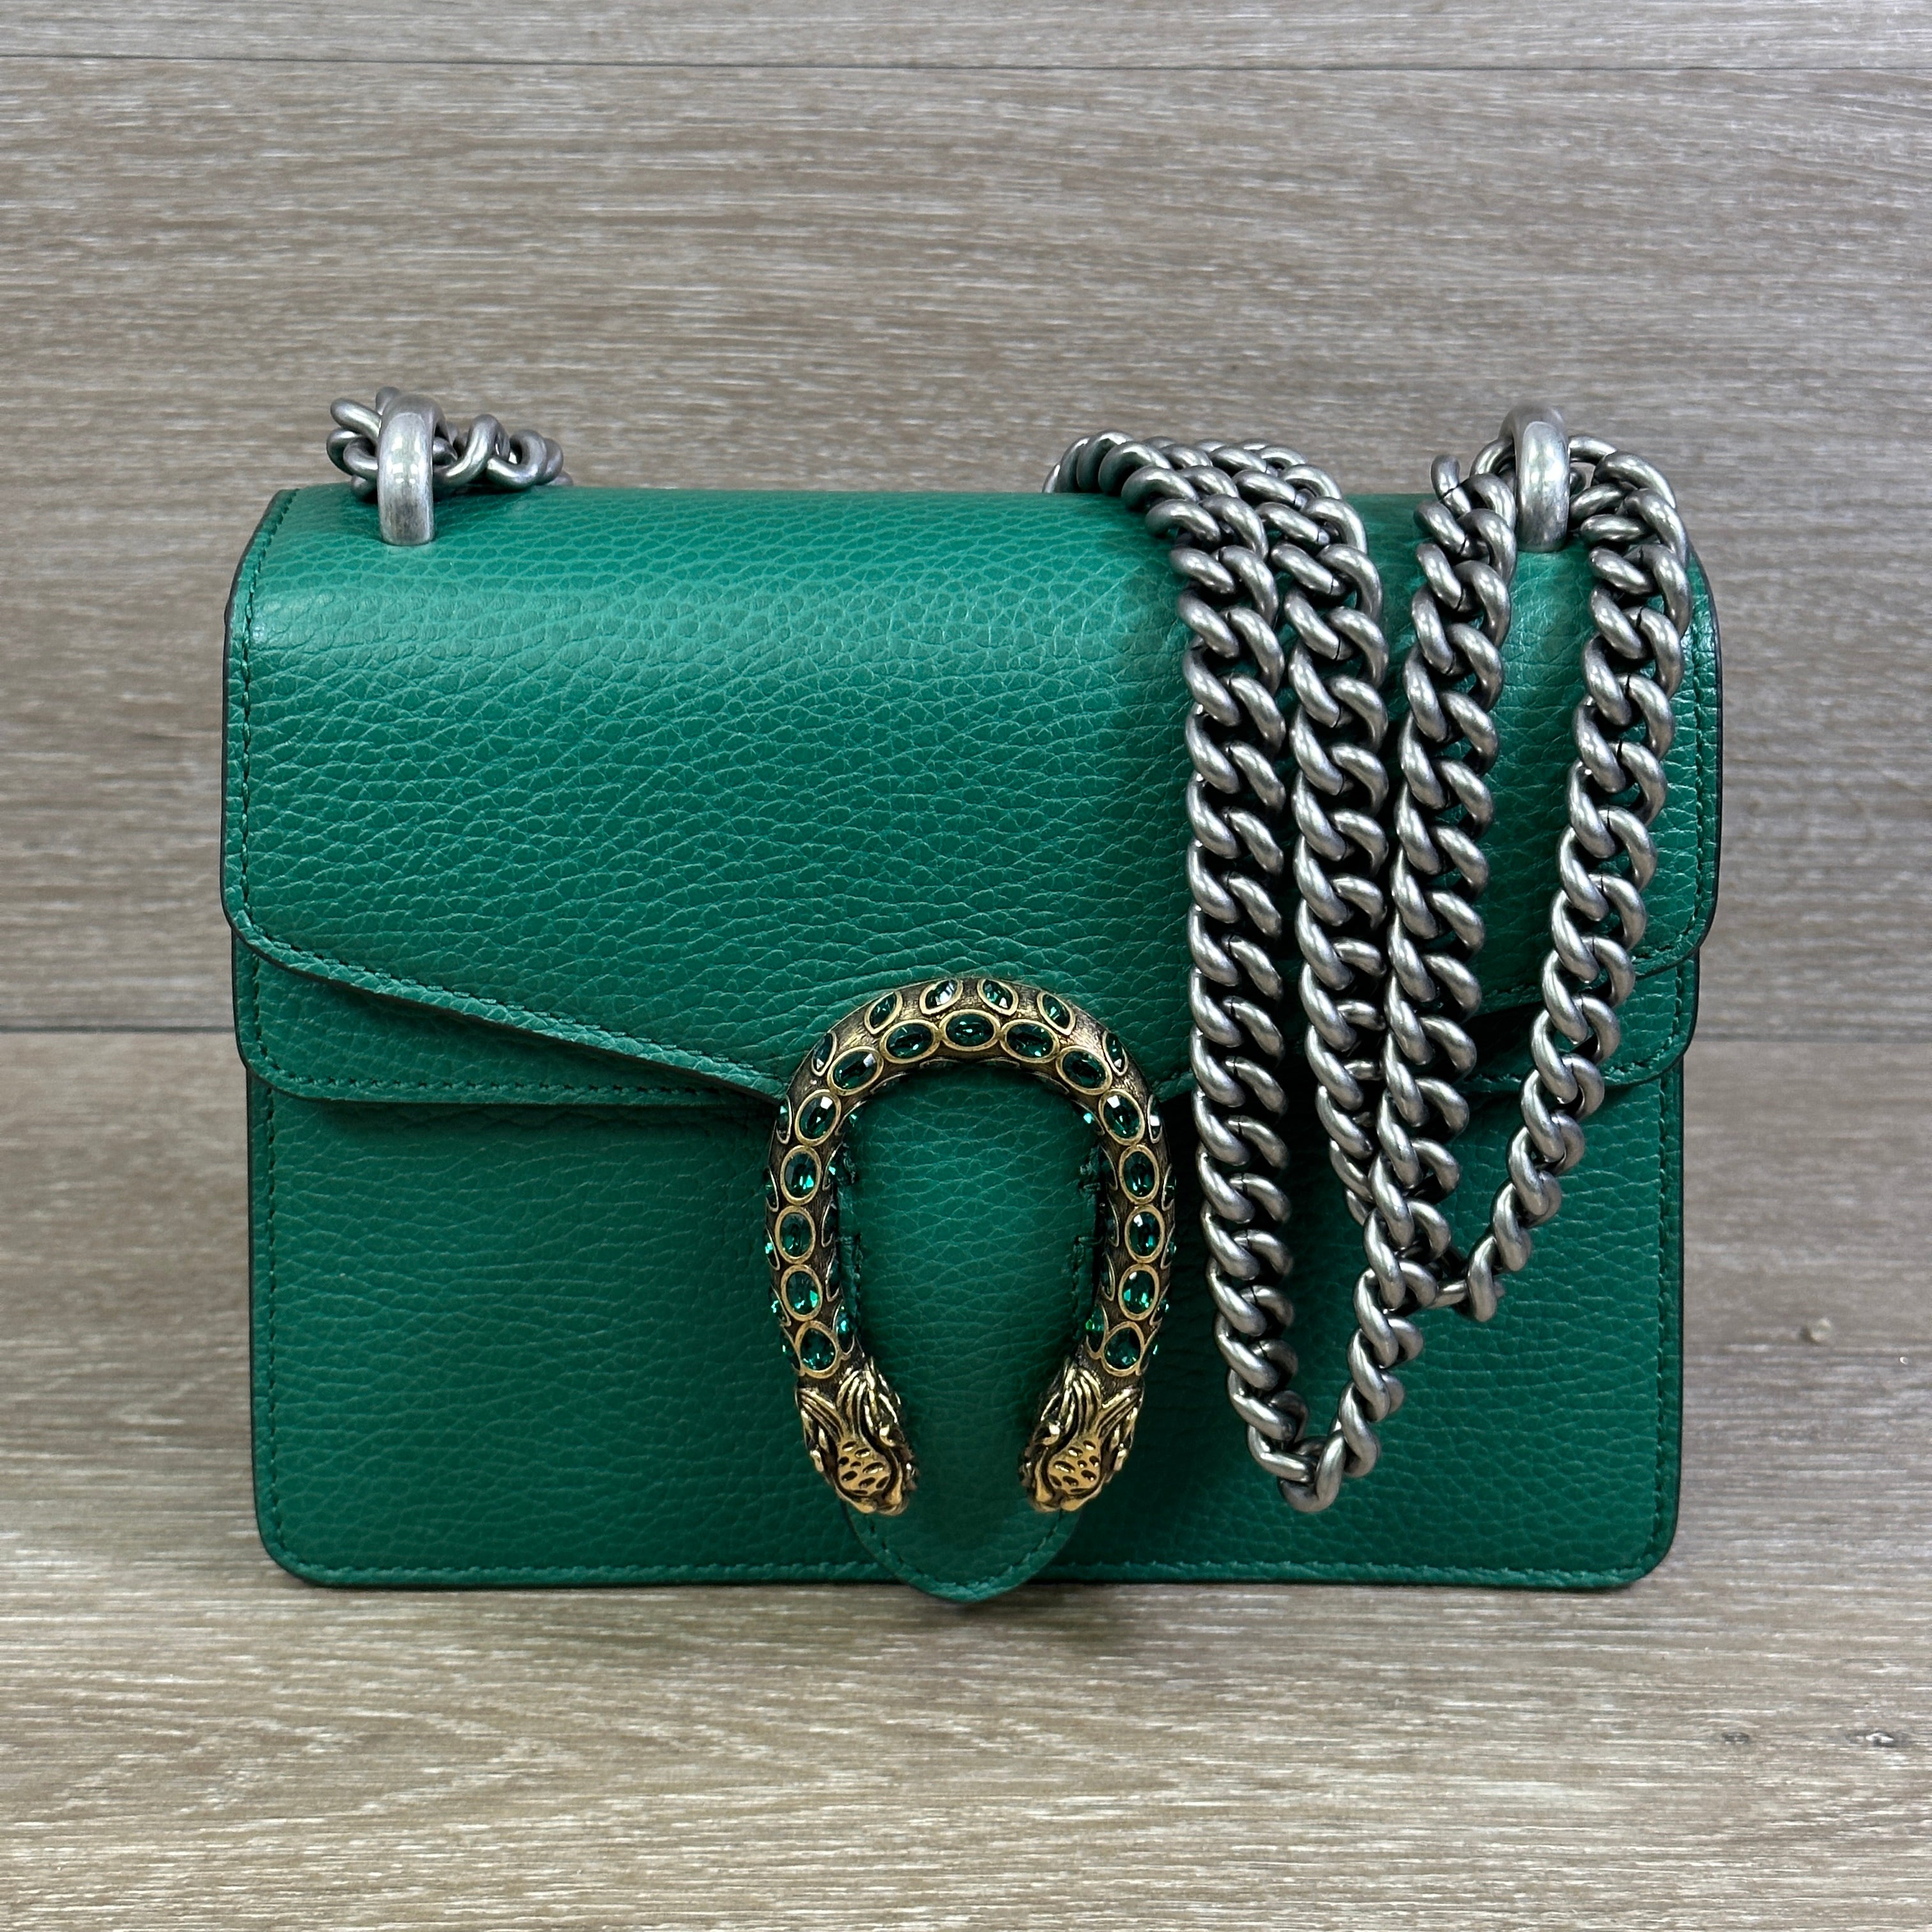 Gucci Green Leather Small Dionysus Shoulder Bag Gucci